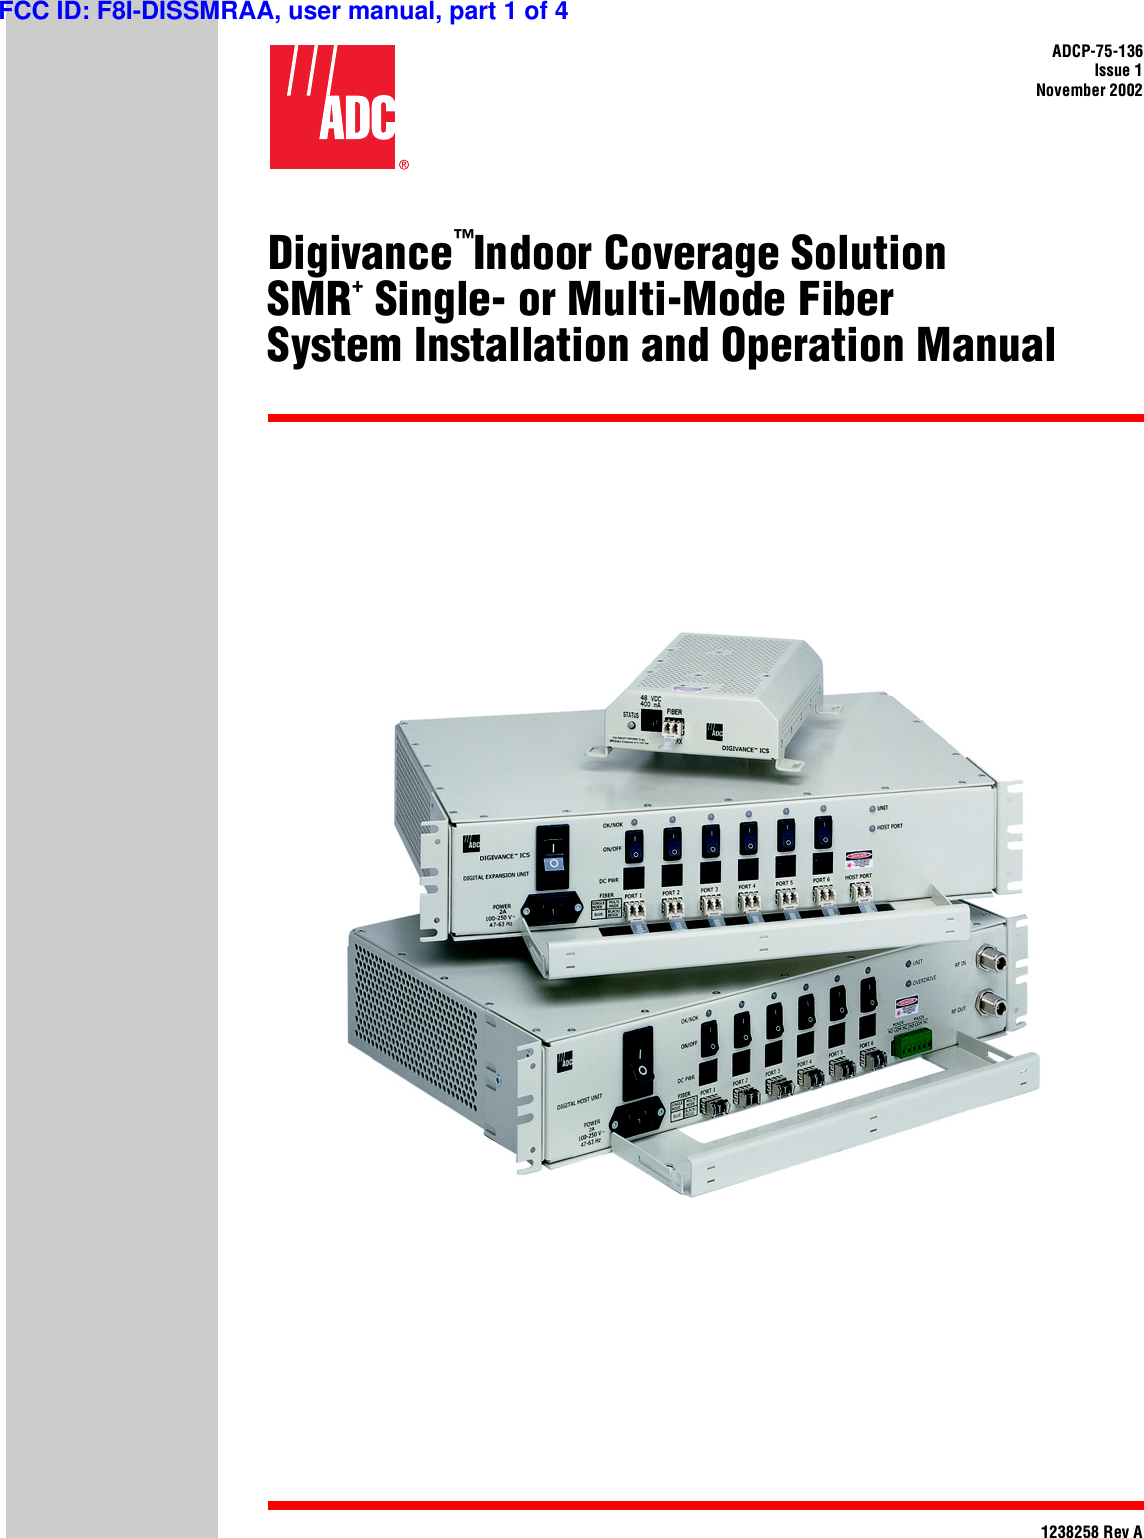 ADCP-75-136Issue 1November 20021238258 Rev ADigivance™Indoor Coverage SolutionSMR+ Single- or Multi-Mode FiberSystem Installation and Operation ManualFCC ID: F8I-DISSMRAA, user manual, part 1 of 4